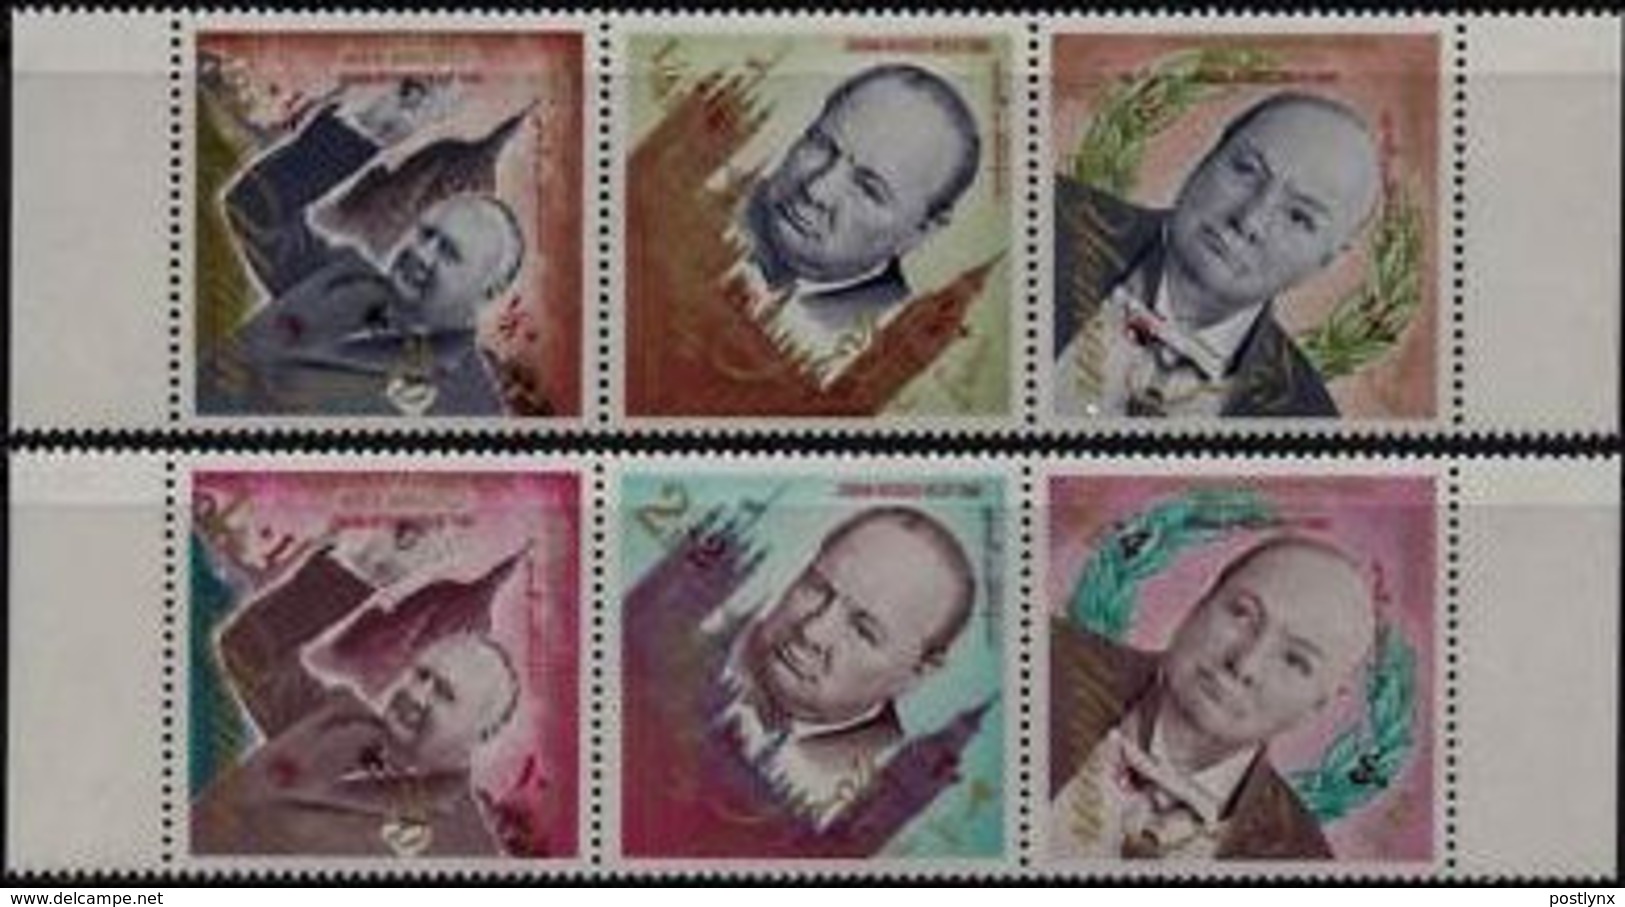 YEMEN KINGDOM (North) 1967 Churchill OVPT:Relief Fund MARG. 3-STRIPS:2 (6 Stamps) - Contro La Fame